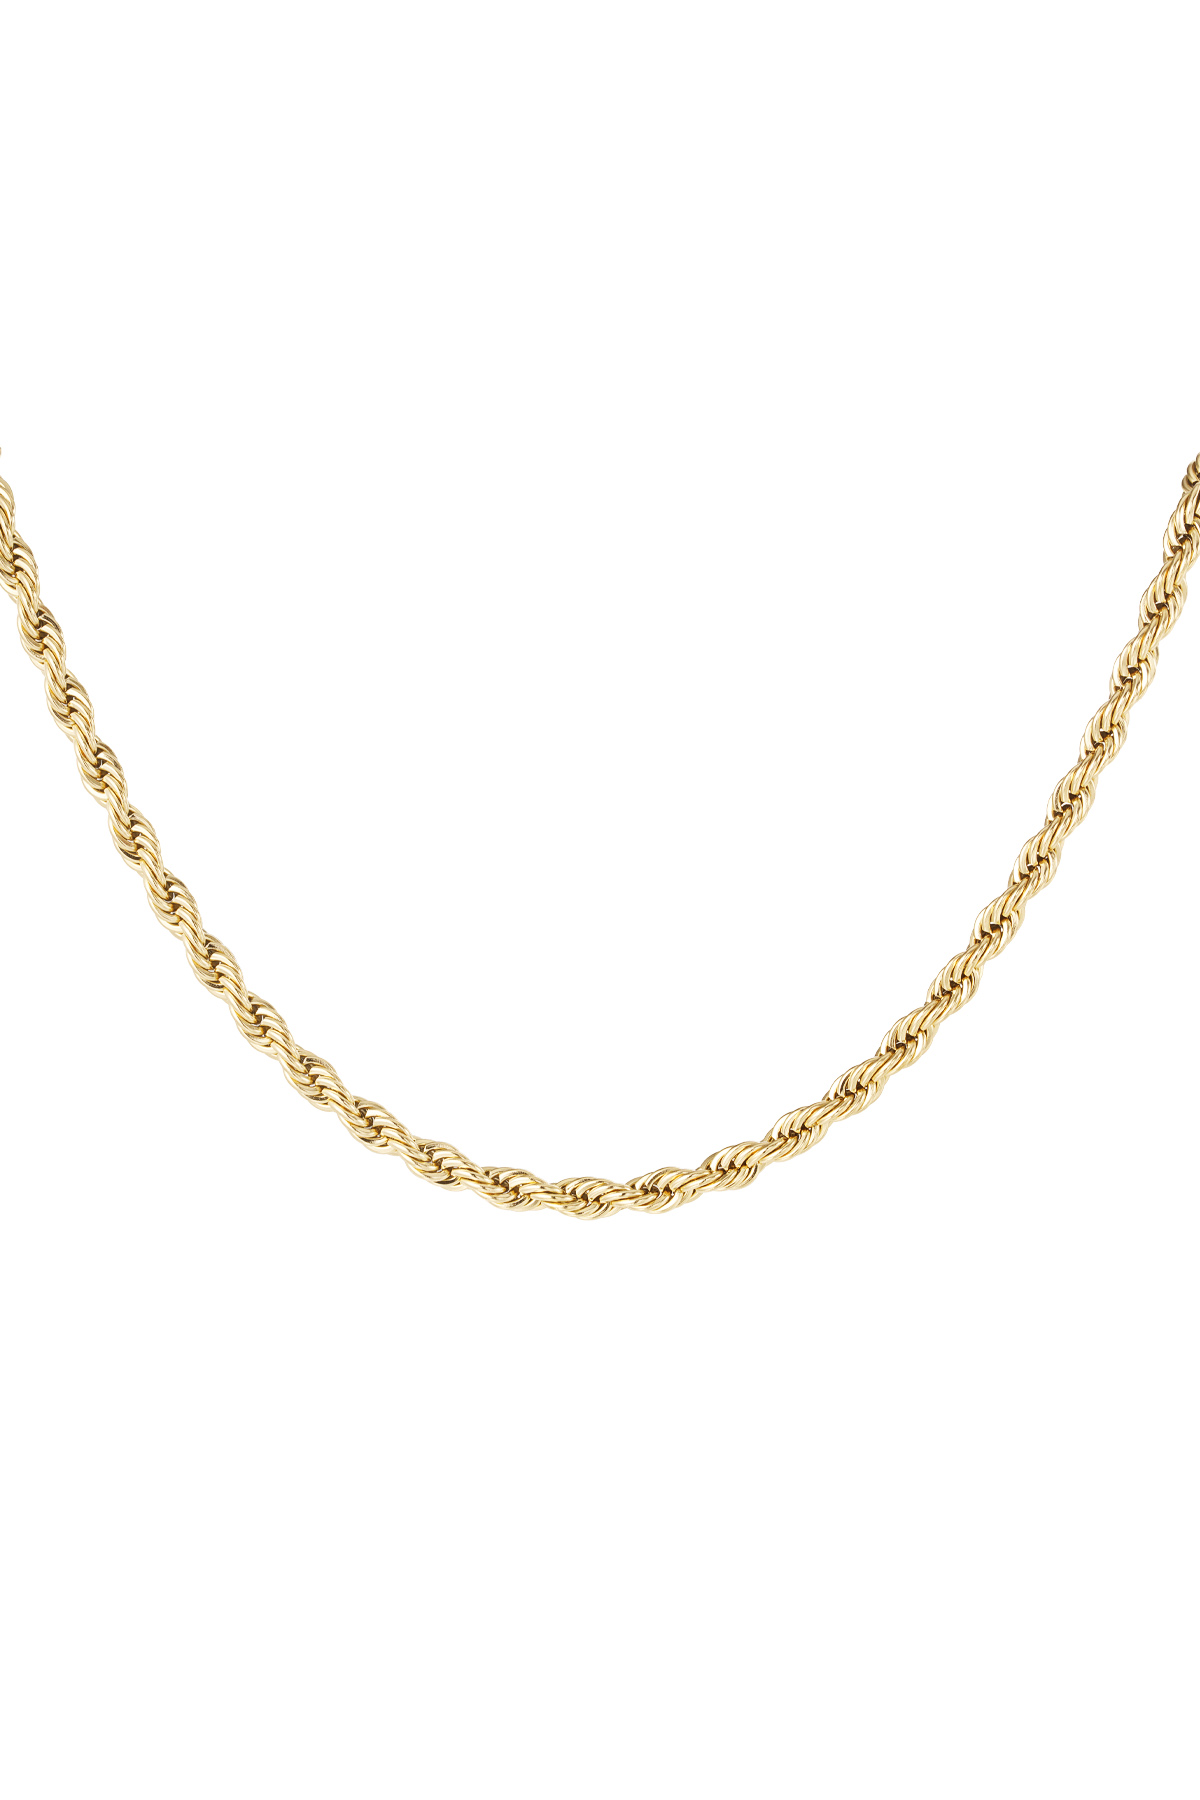 Unisex necklace thick twisted short - gold-4.5MM h5 